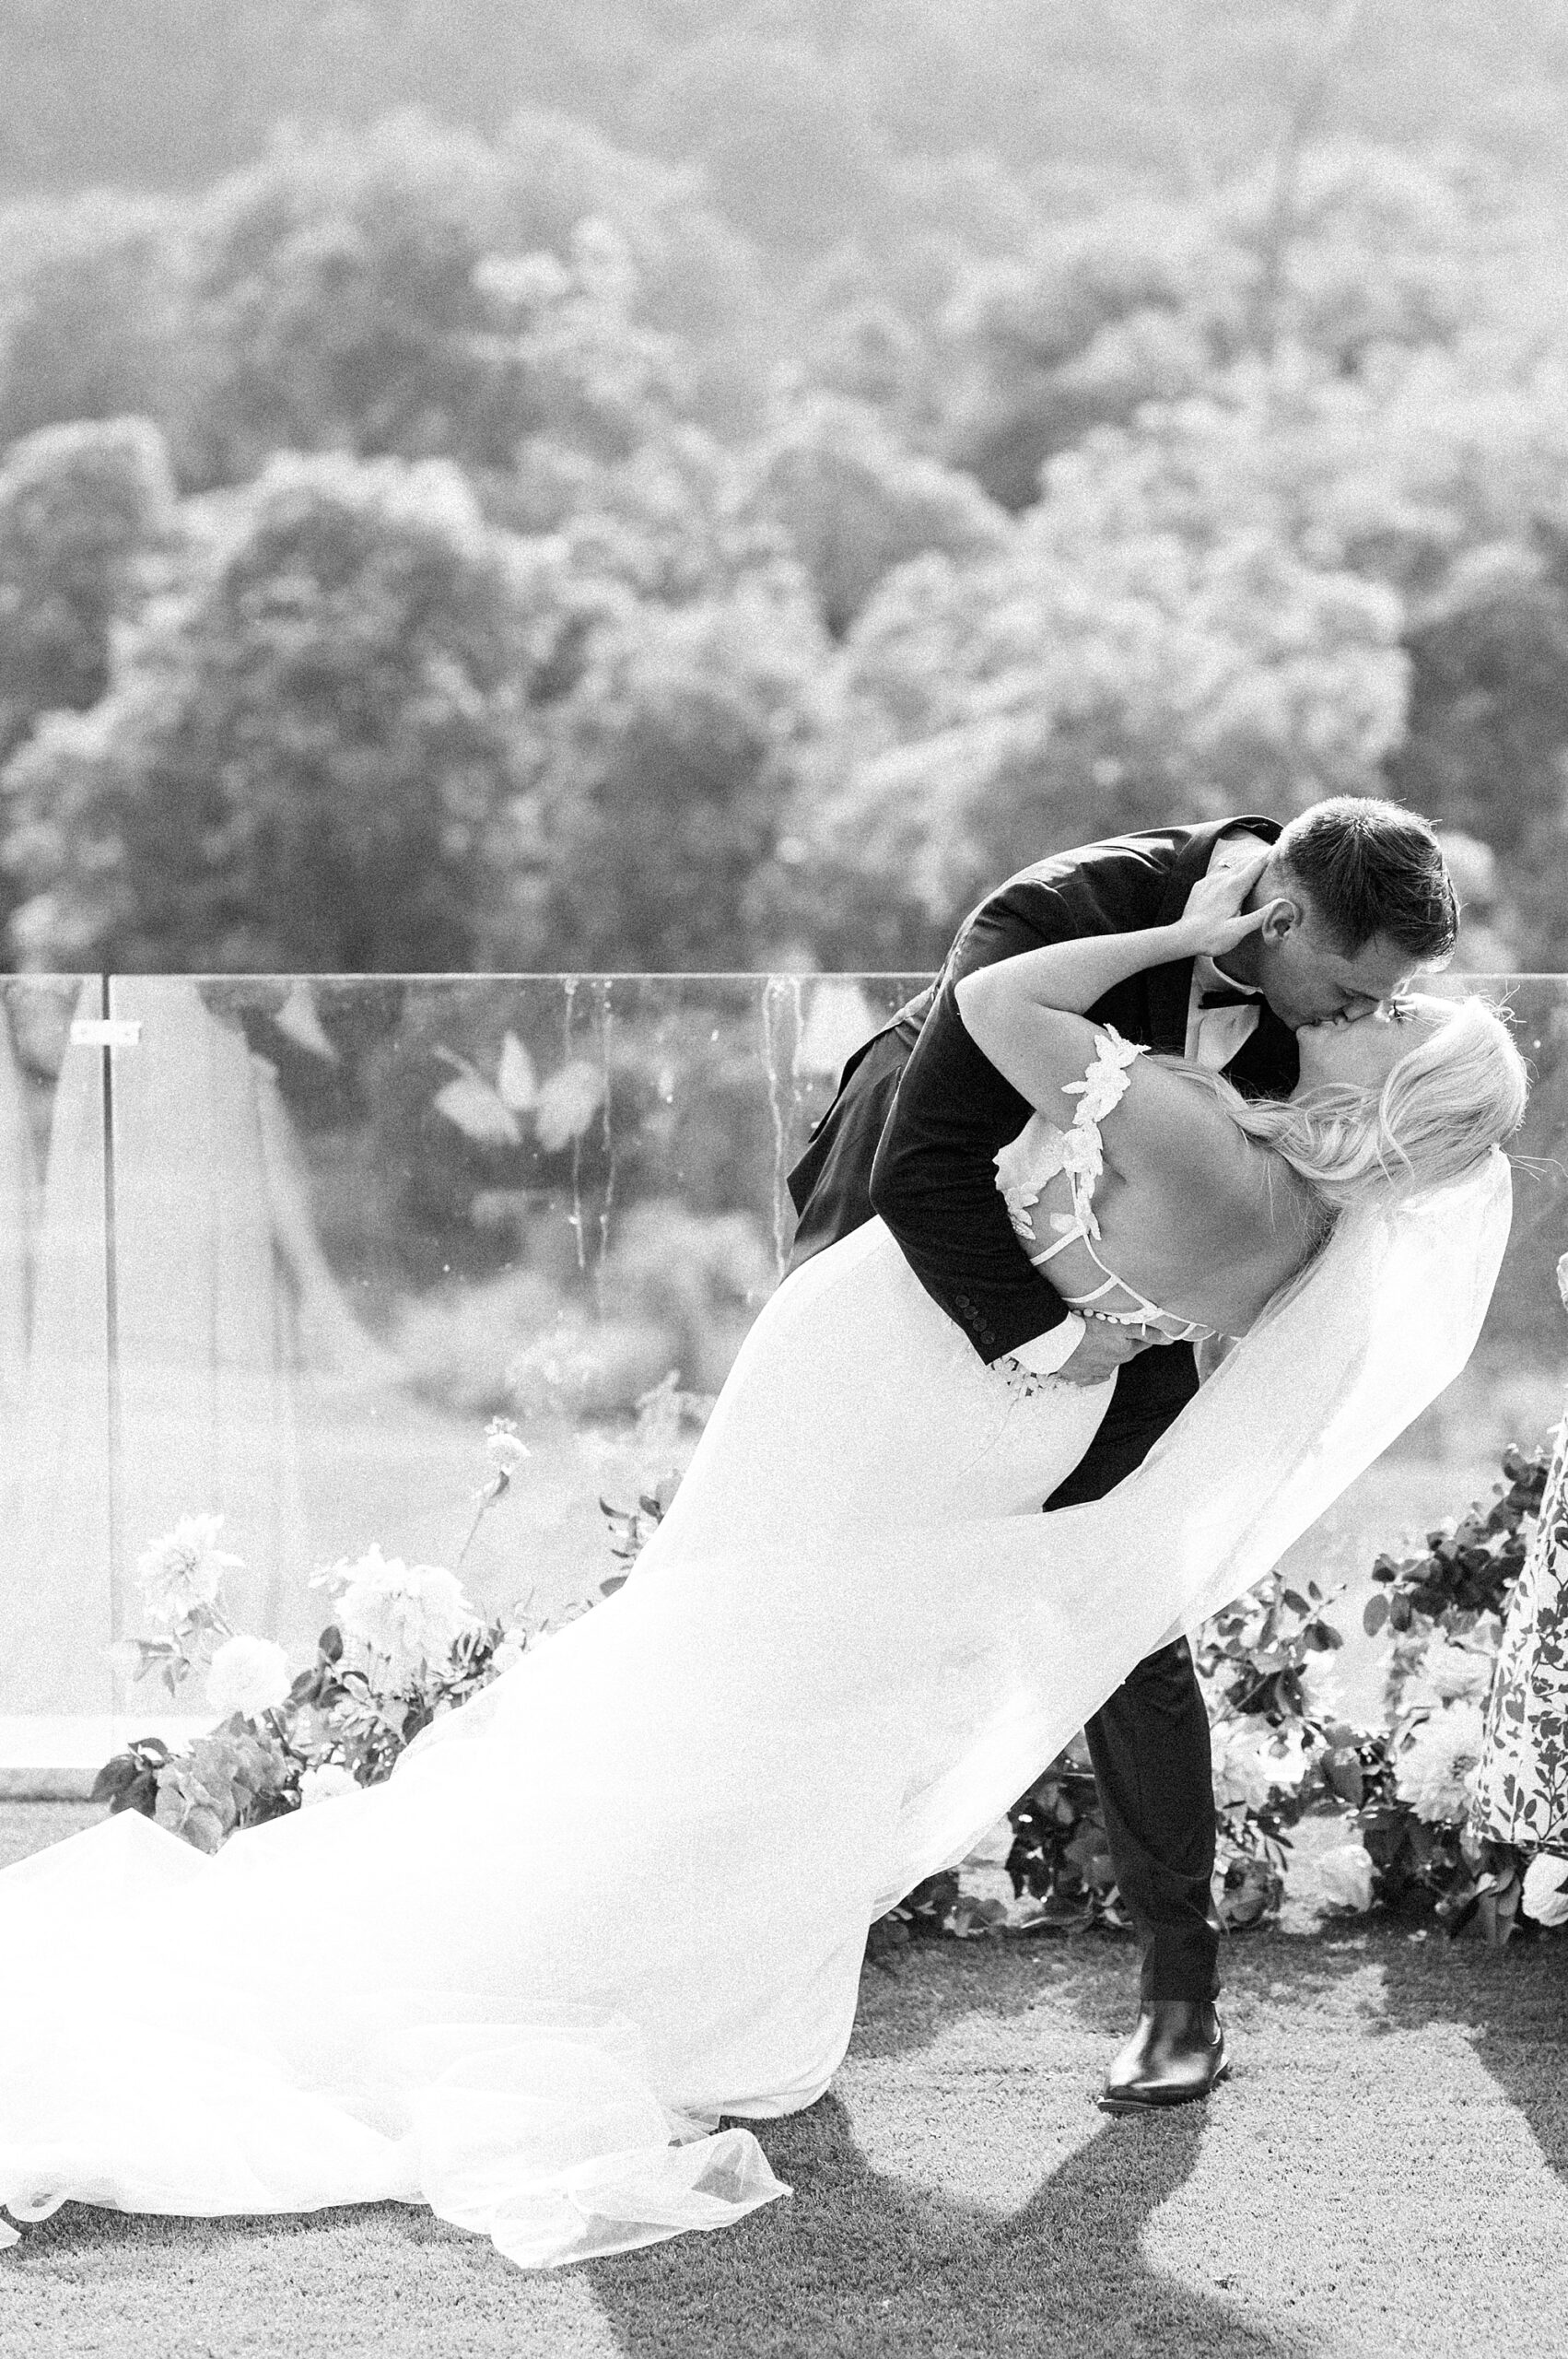 newlyweds kiss as they are pronounced husband and wife